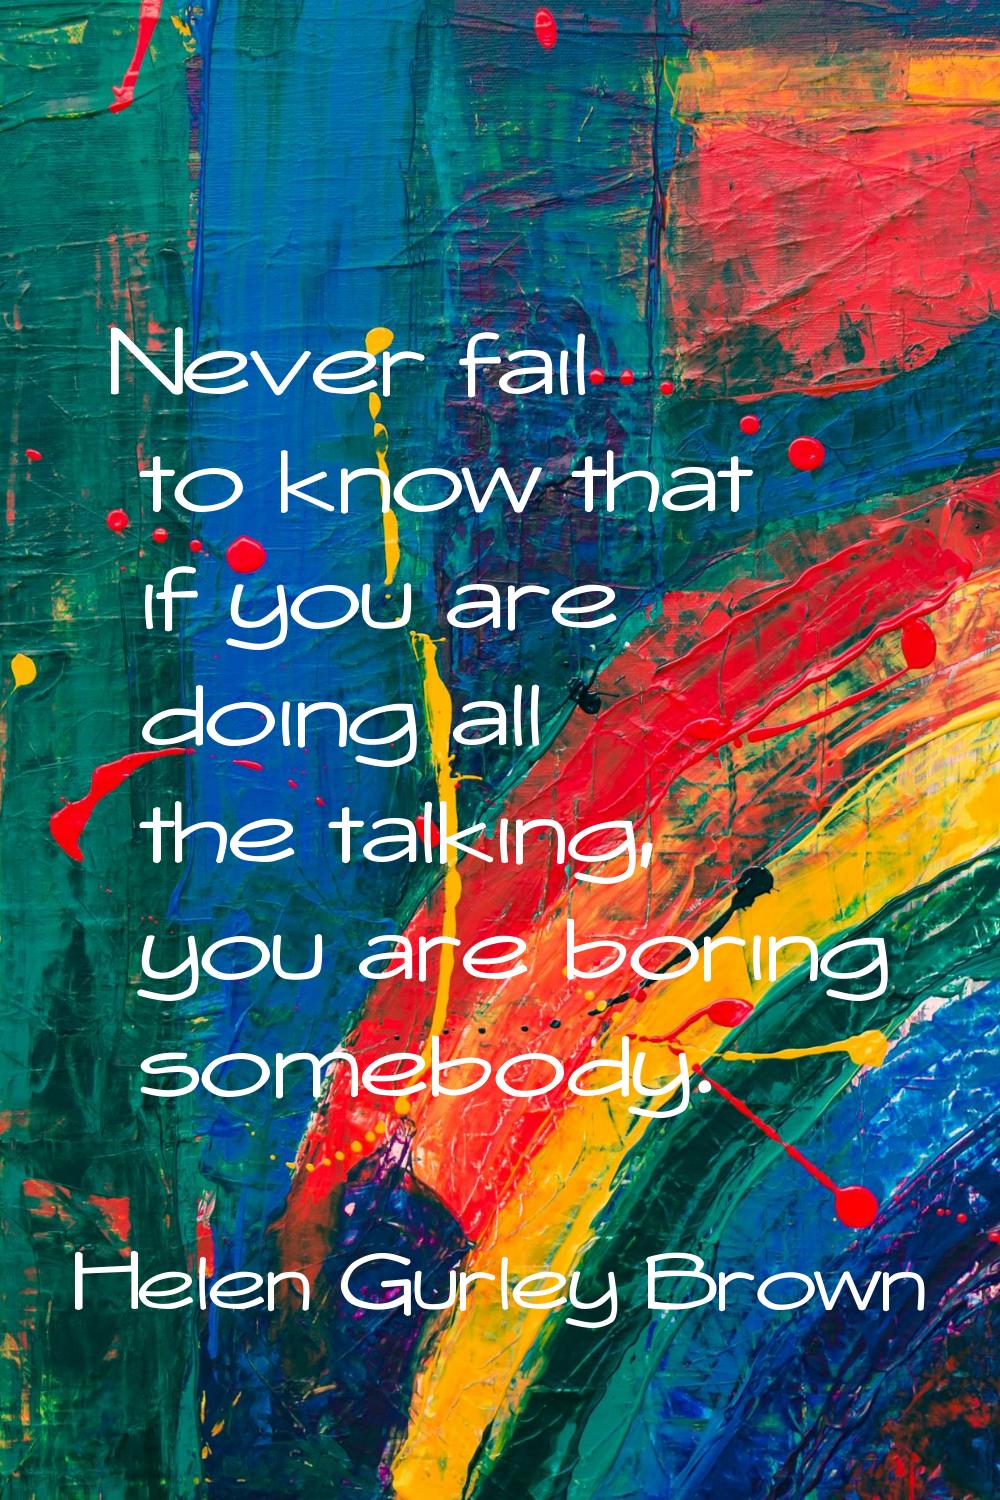 Never fail to know that if you are doing all the talking, you are boring somebody.